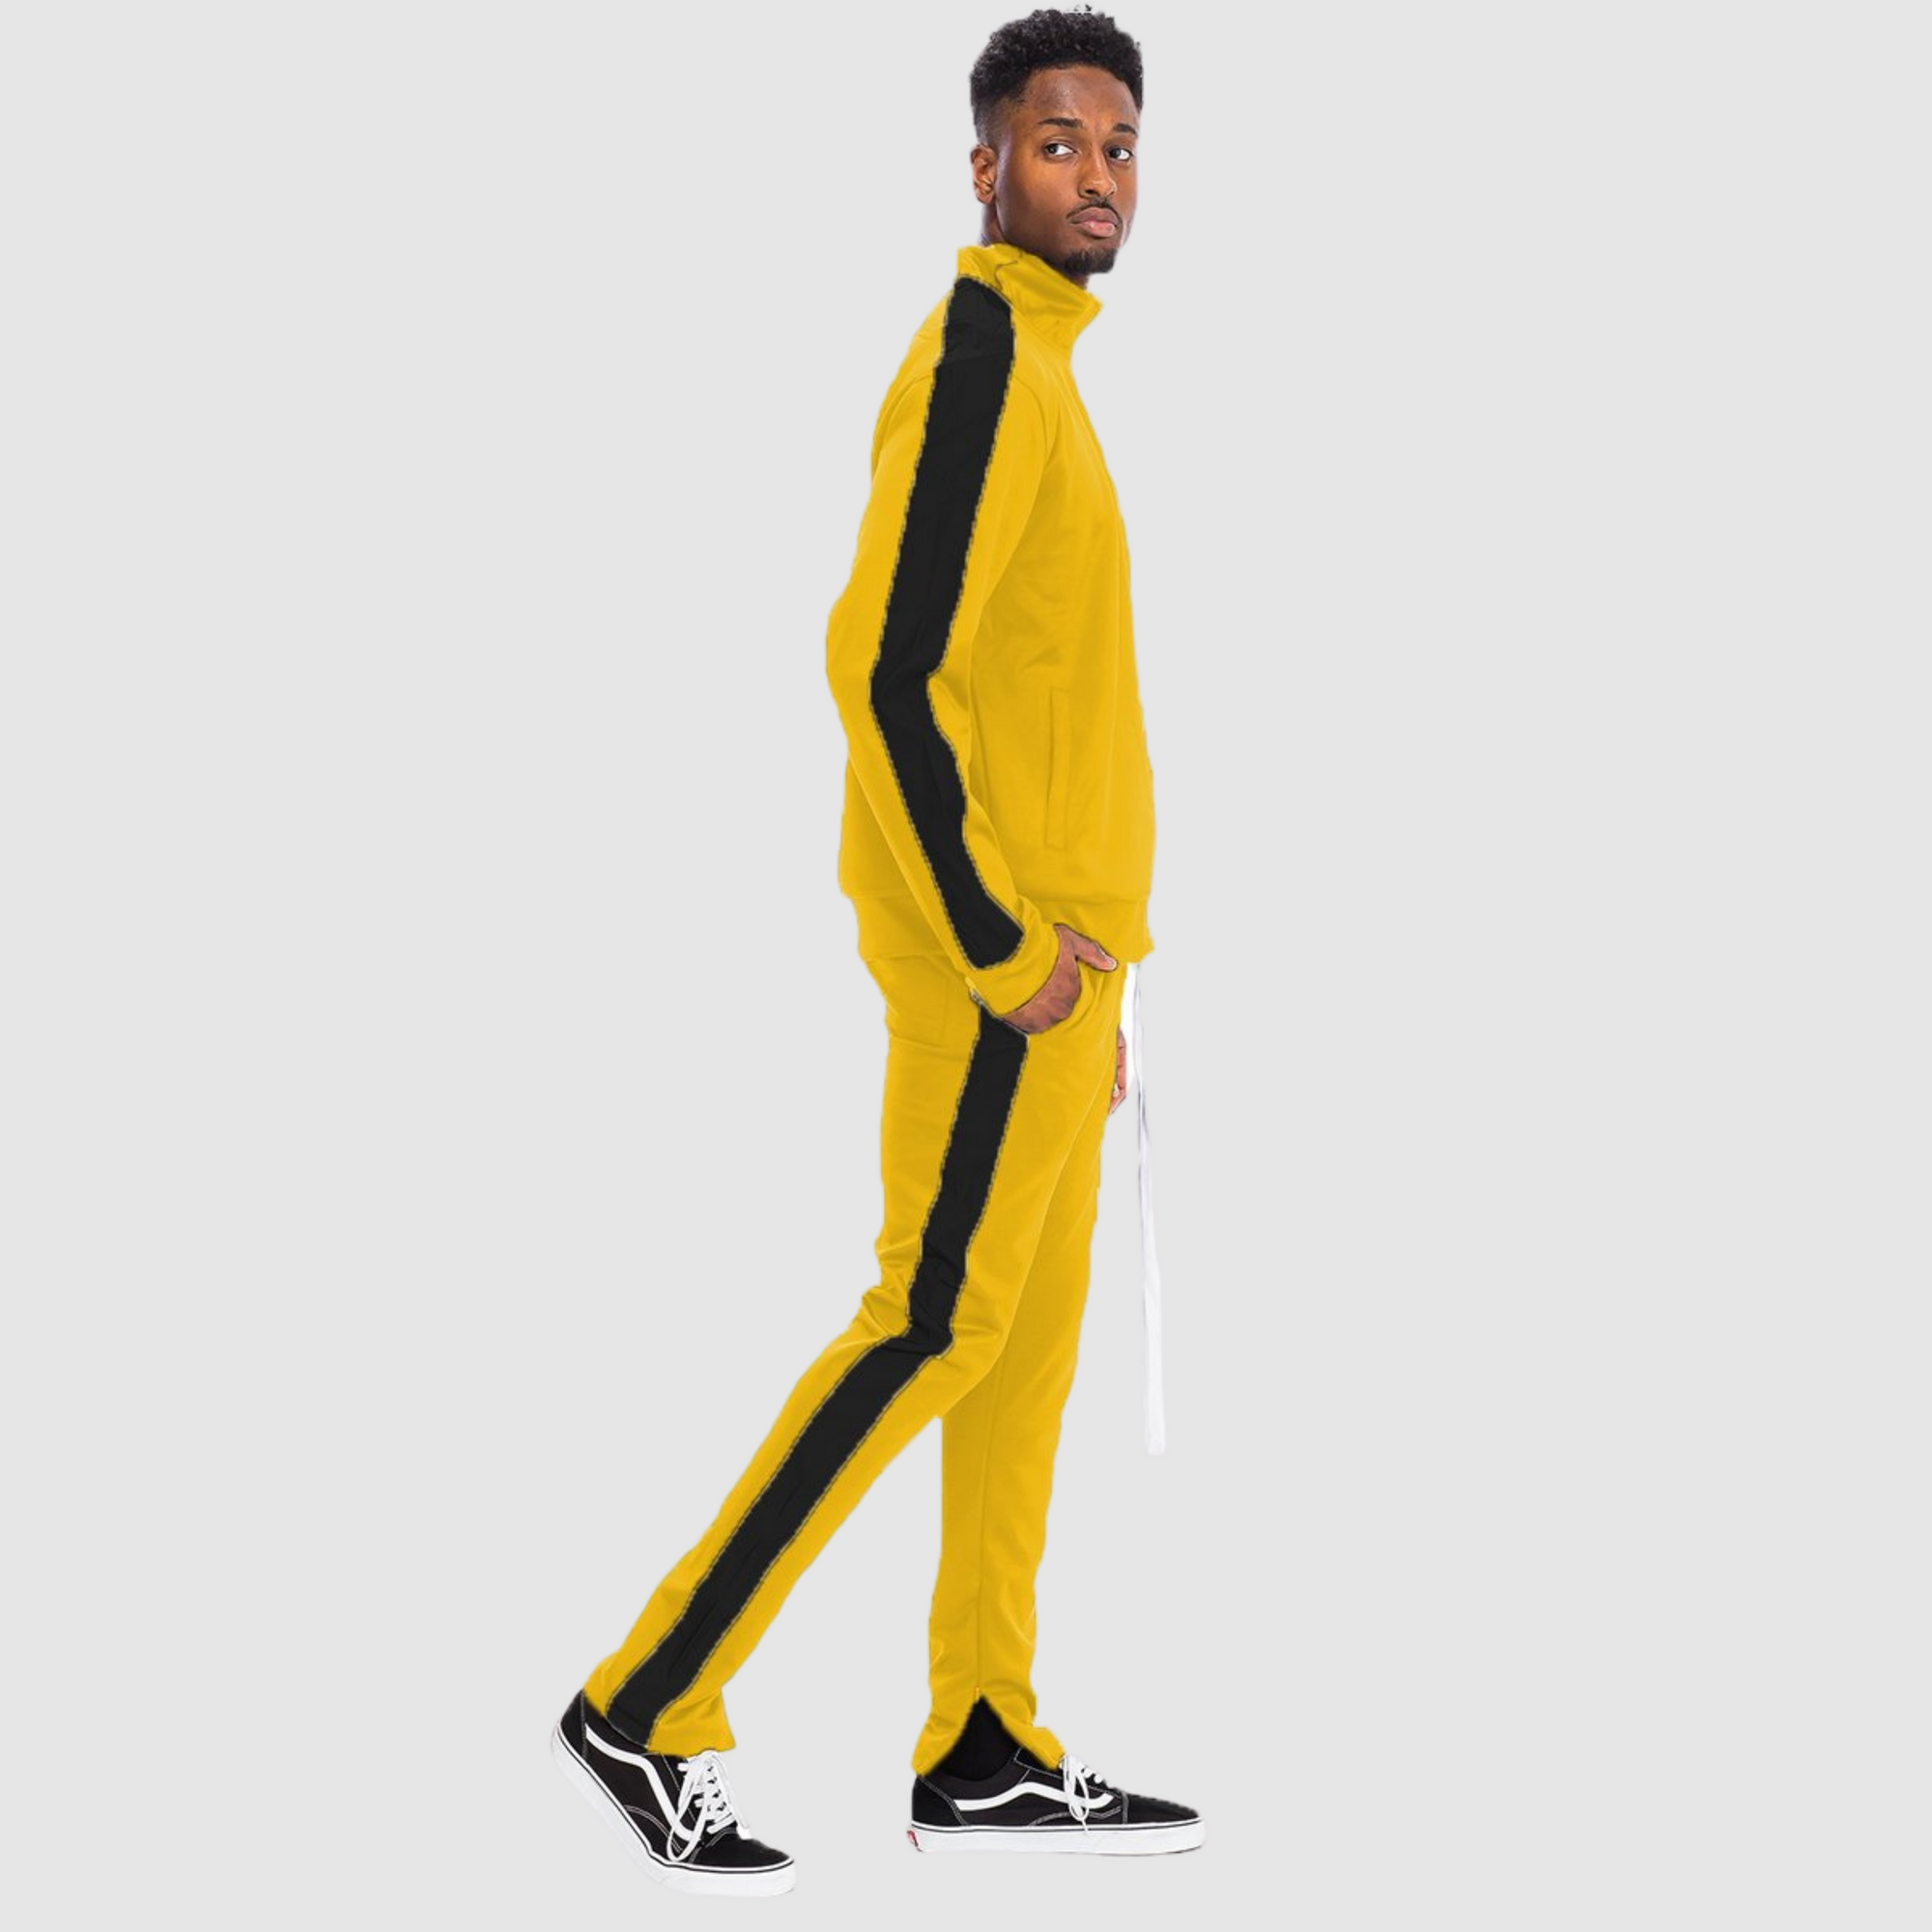 This fashionable track reflective drawstring set tracksuit has features of a solid design with side band detailing on the side and pockets. Perfect for athletic jogging, casual wear or a busy active day. 